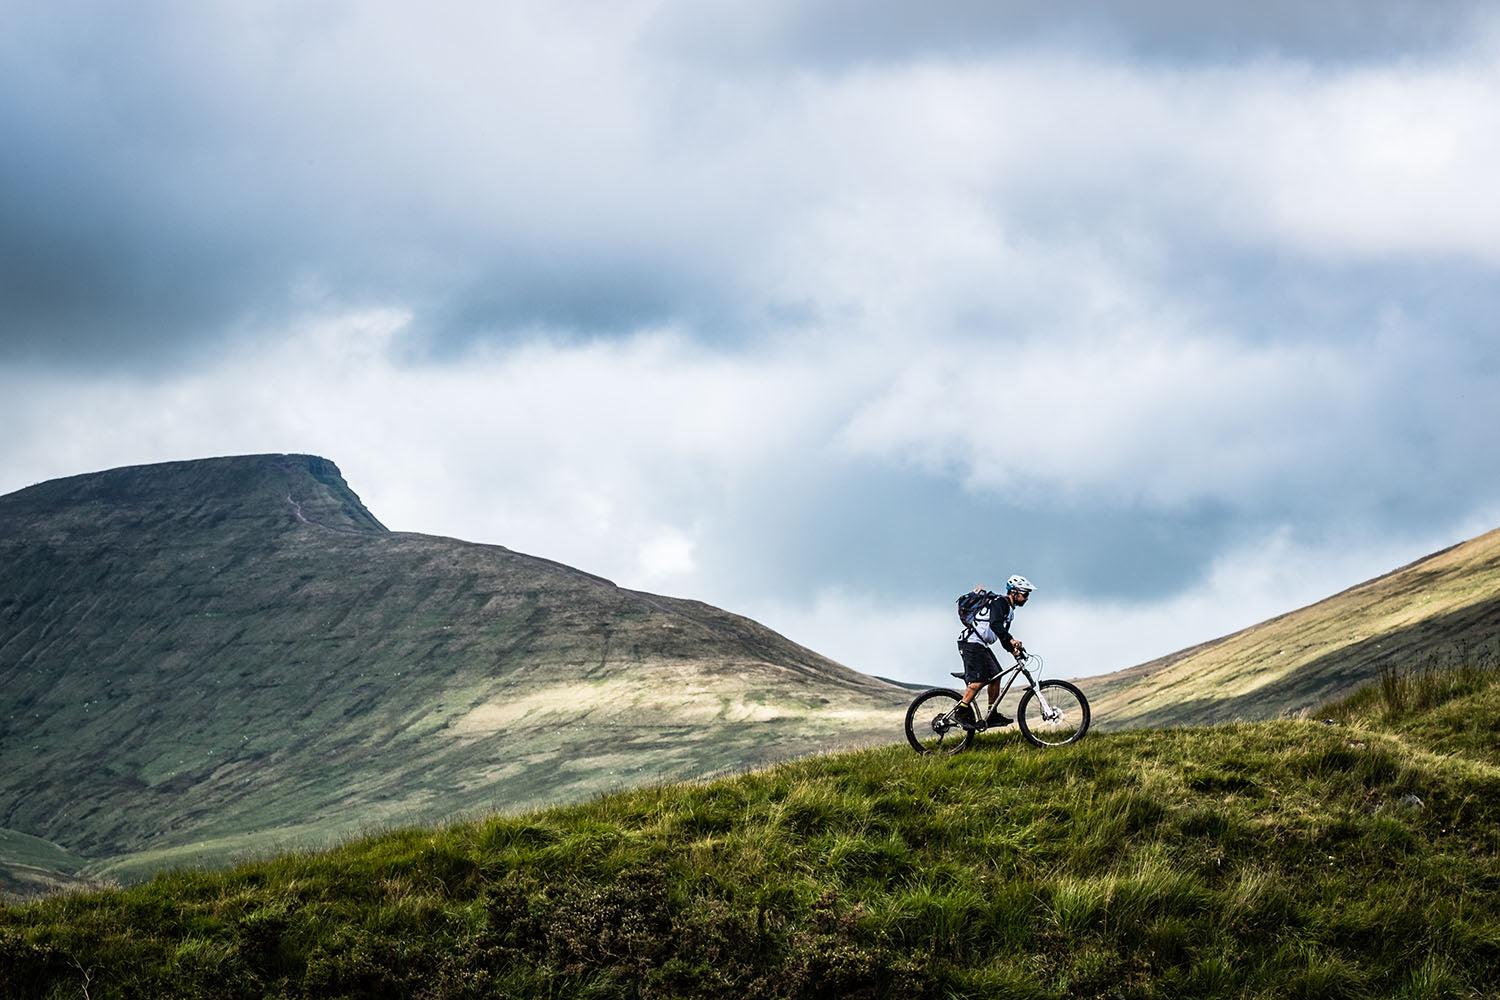 Mountain biking in the Brecon Beacons - lone rider against an epic view